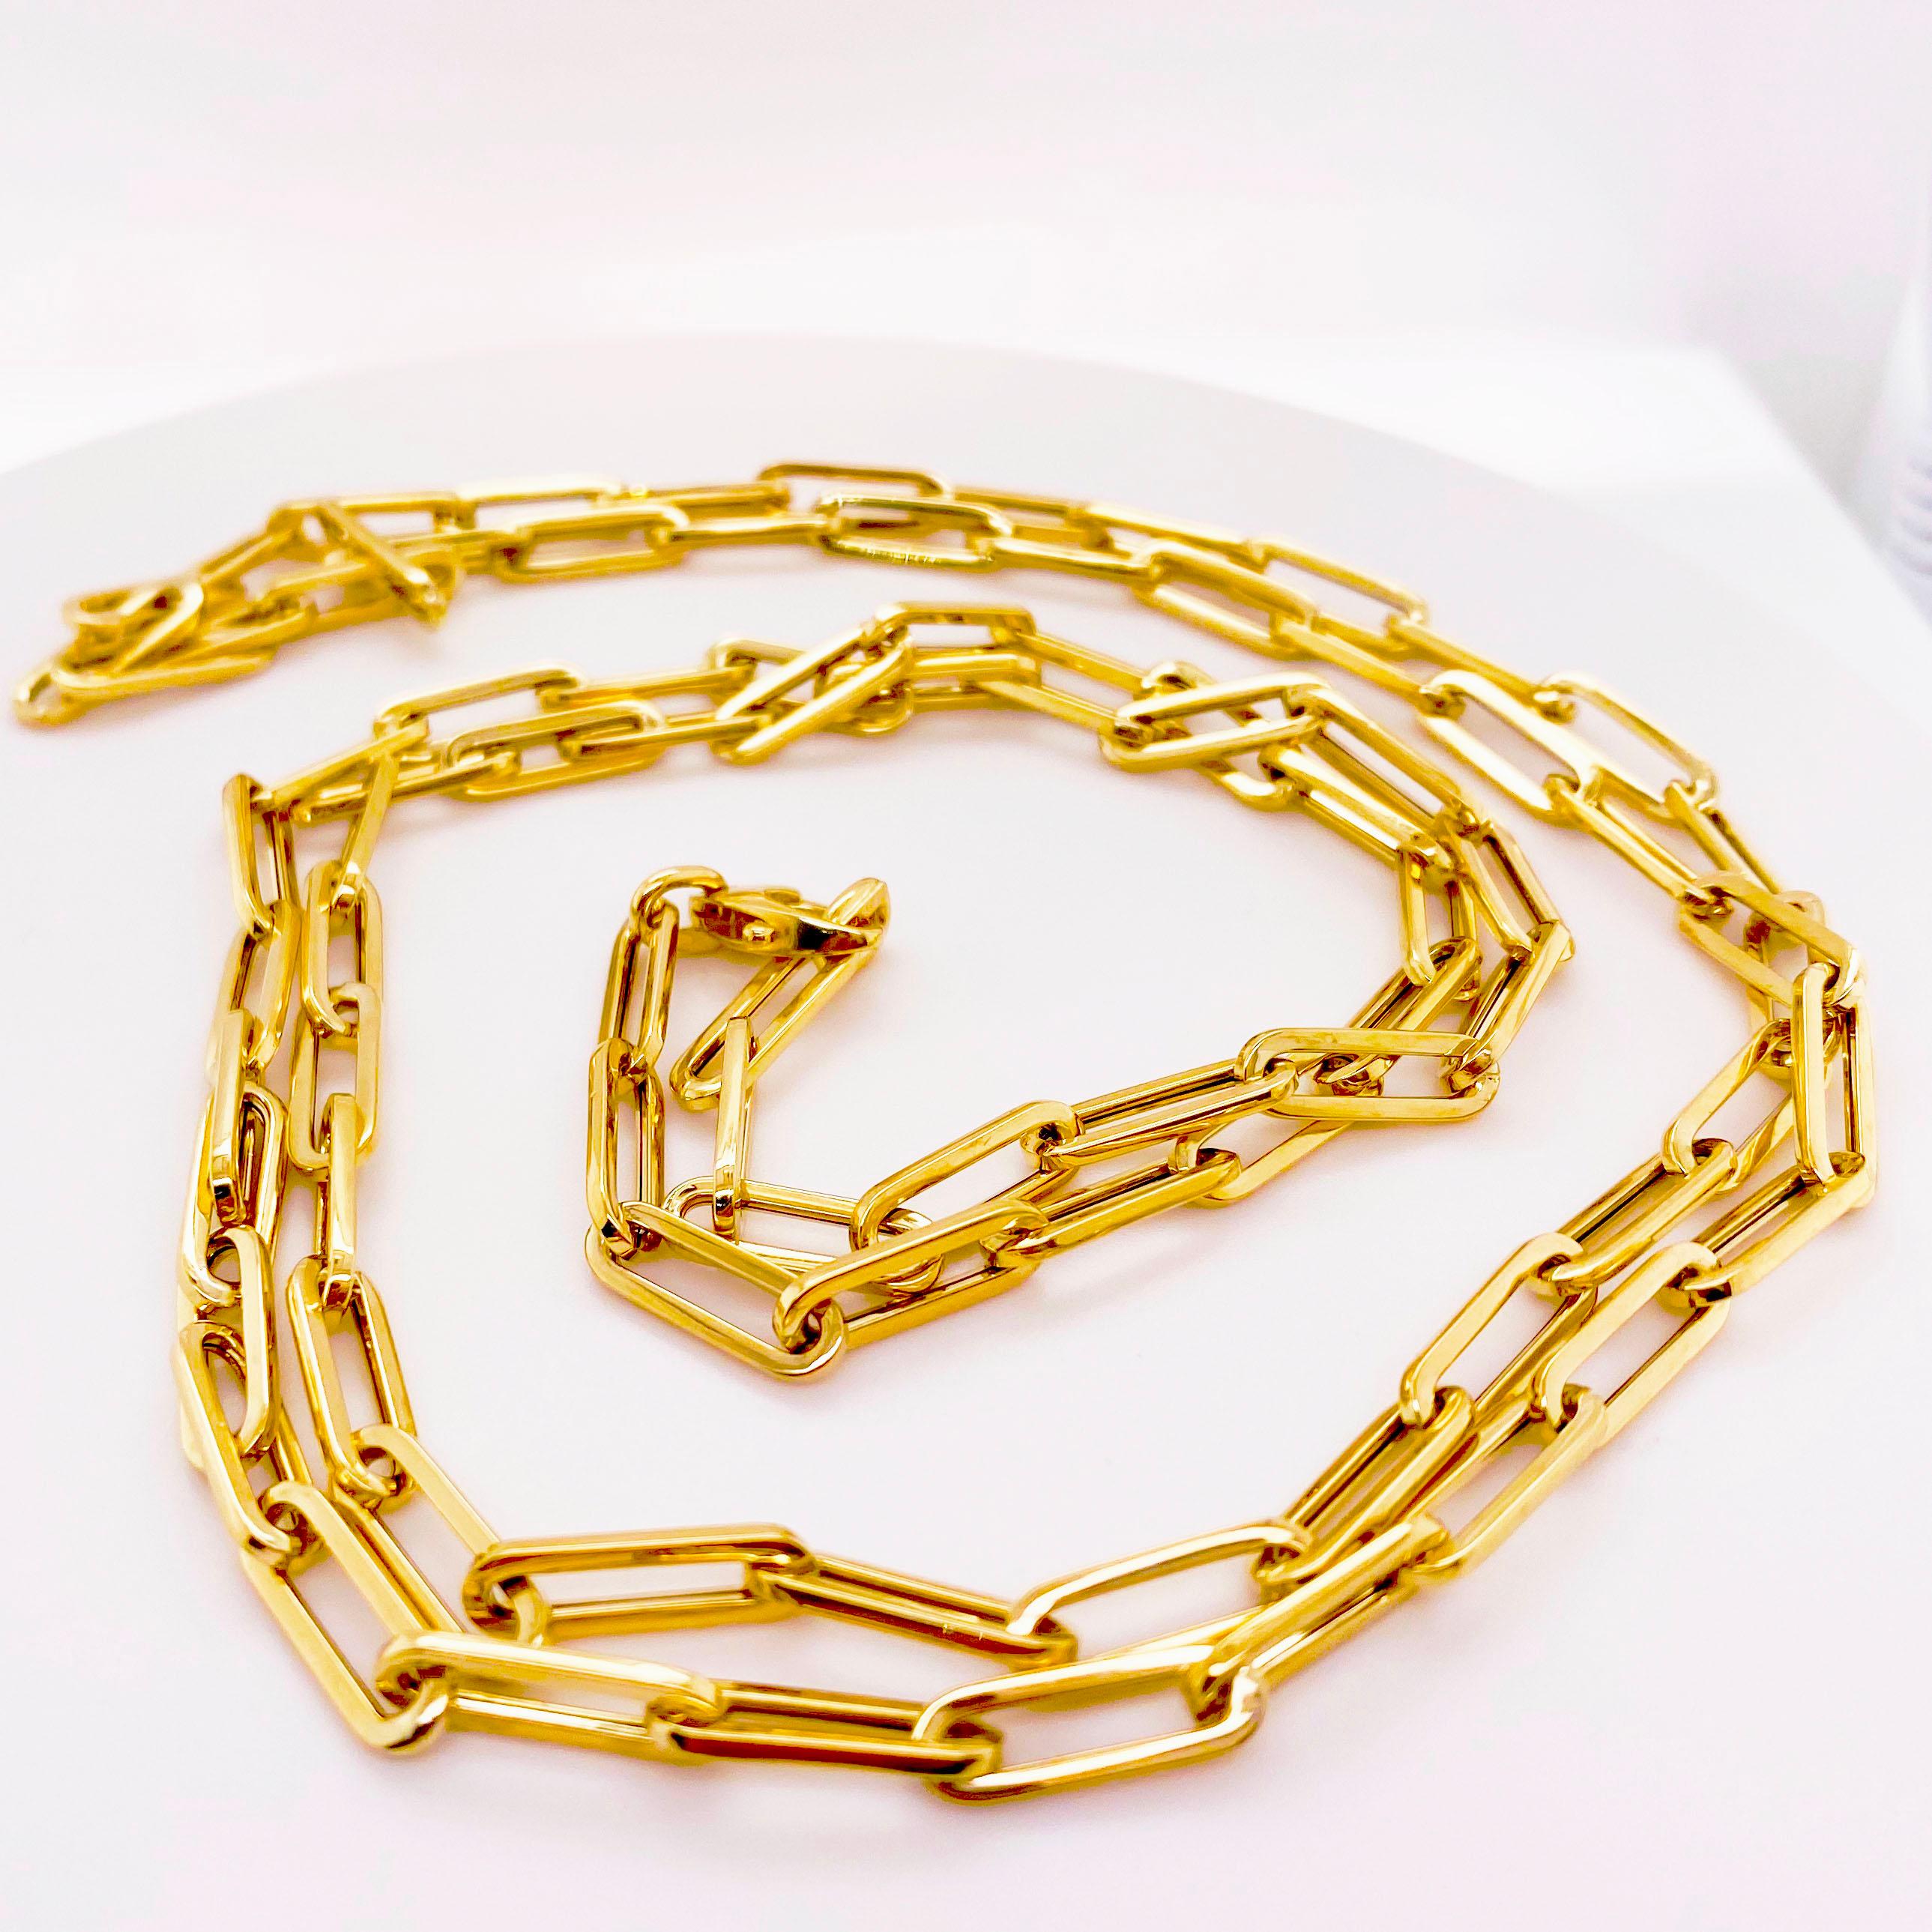 Contemporary Paper Clip Chain, 18 Inch 2.5mm 14 Karat Yellow Gold Paperclip Link Necklace